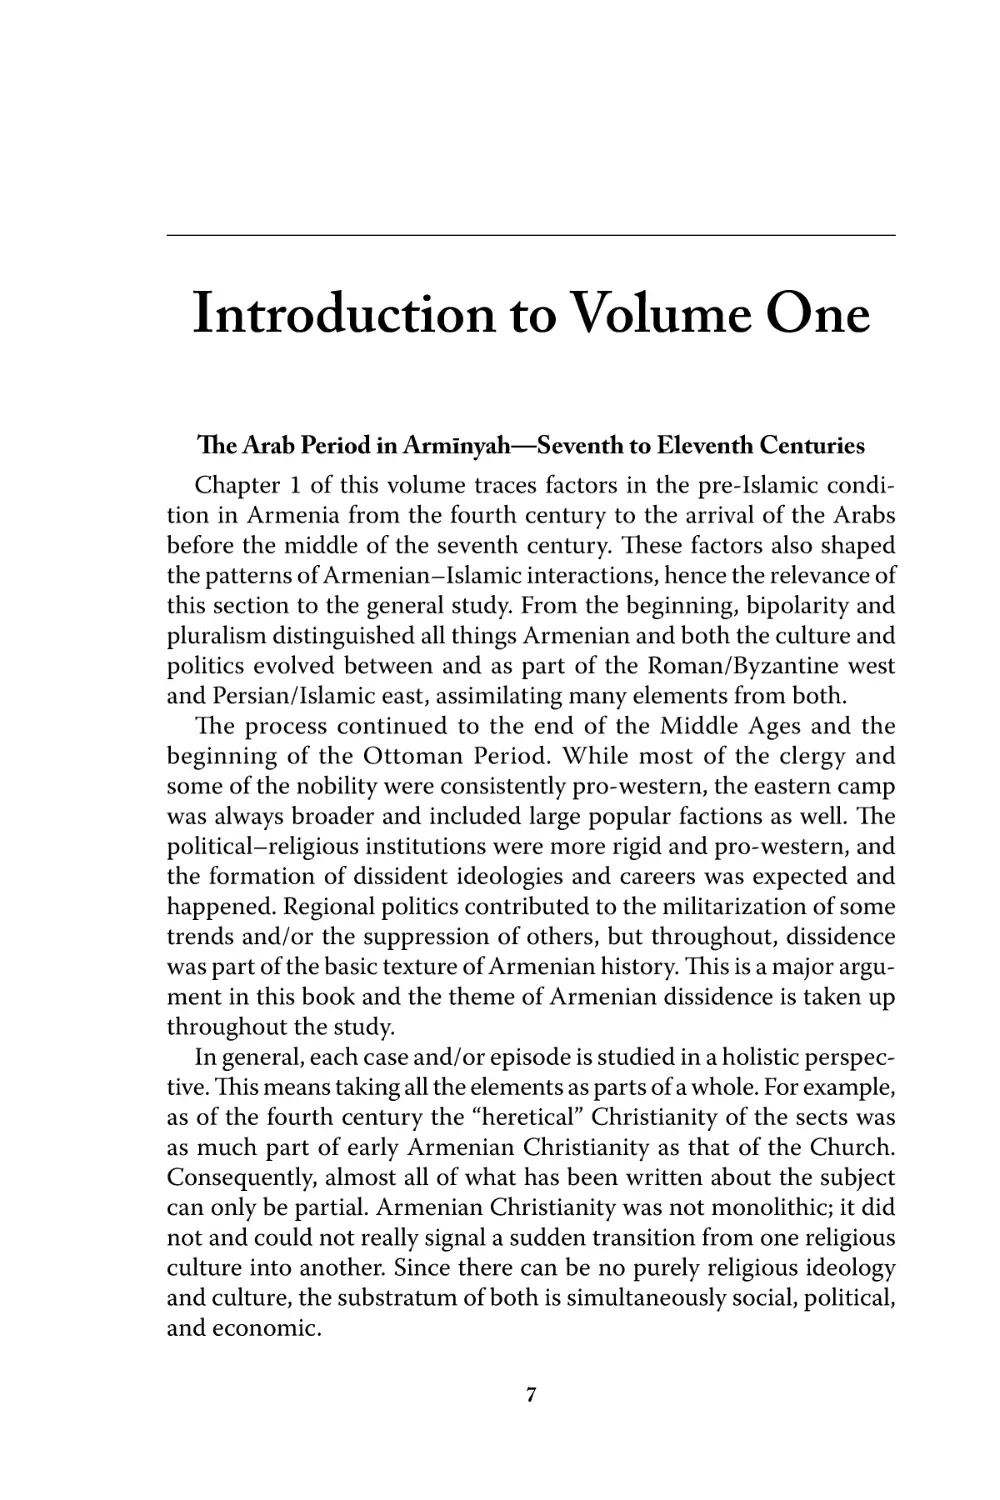 Introduction to Volume One